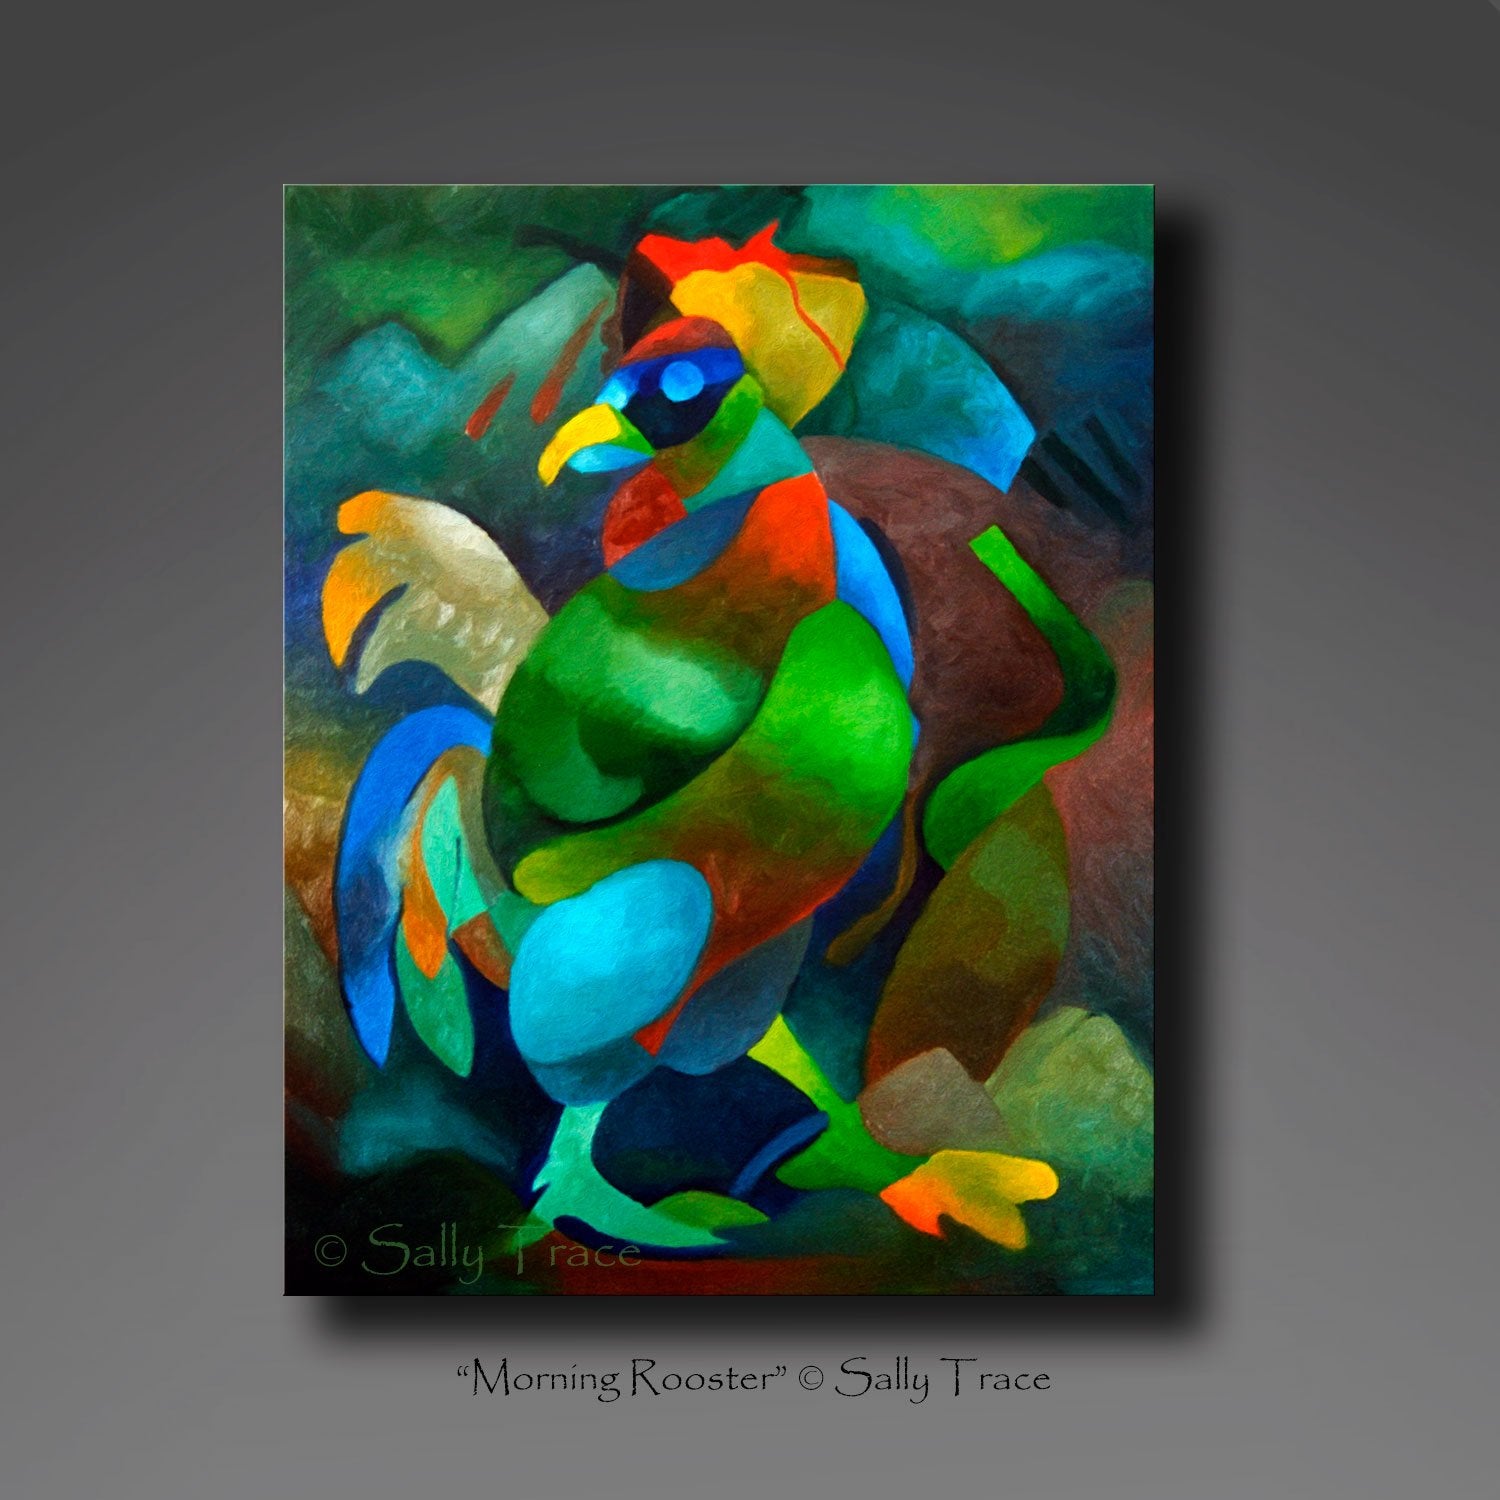 Morning Rooster, abstract art painting print on canvas by Sally Trace from the original oil painting.